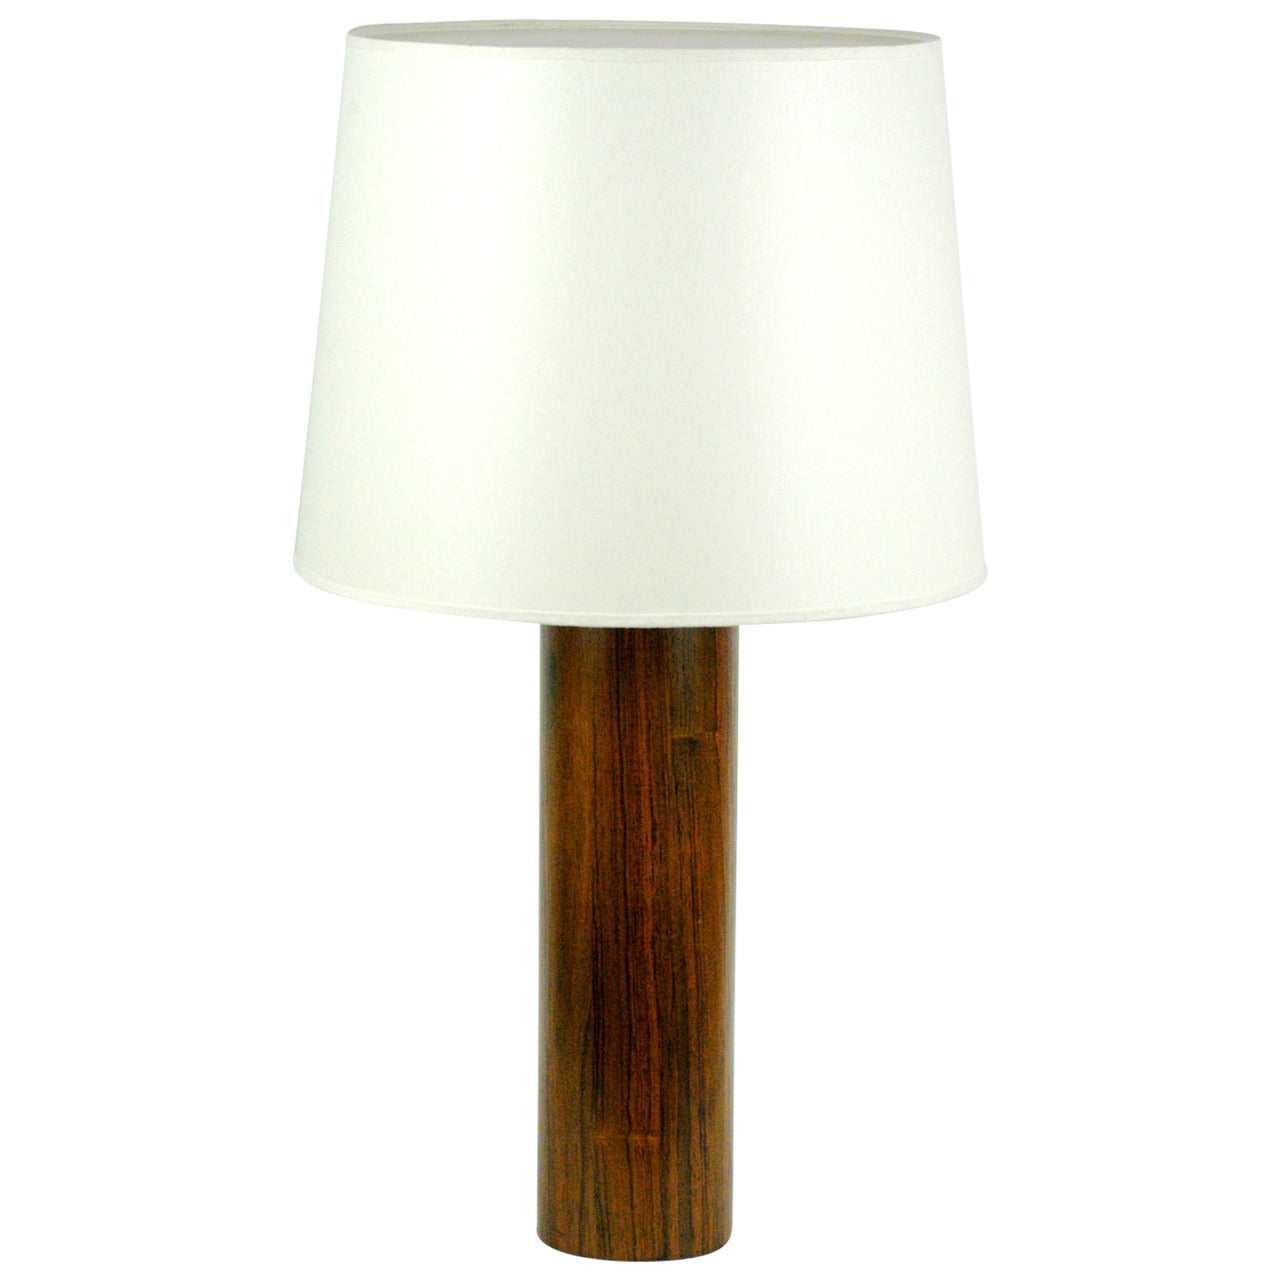 Scandinavian Modern Rosewood Table Lamp by U. and O. Kristiansson for Luxus